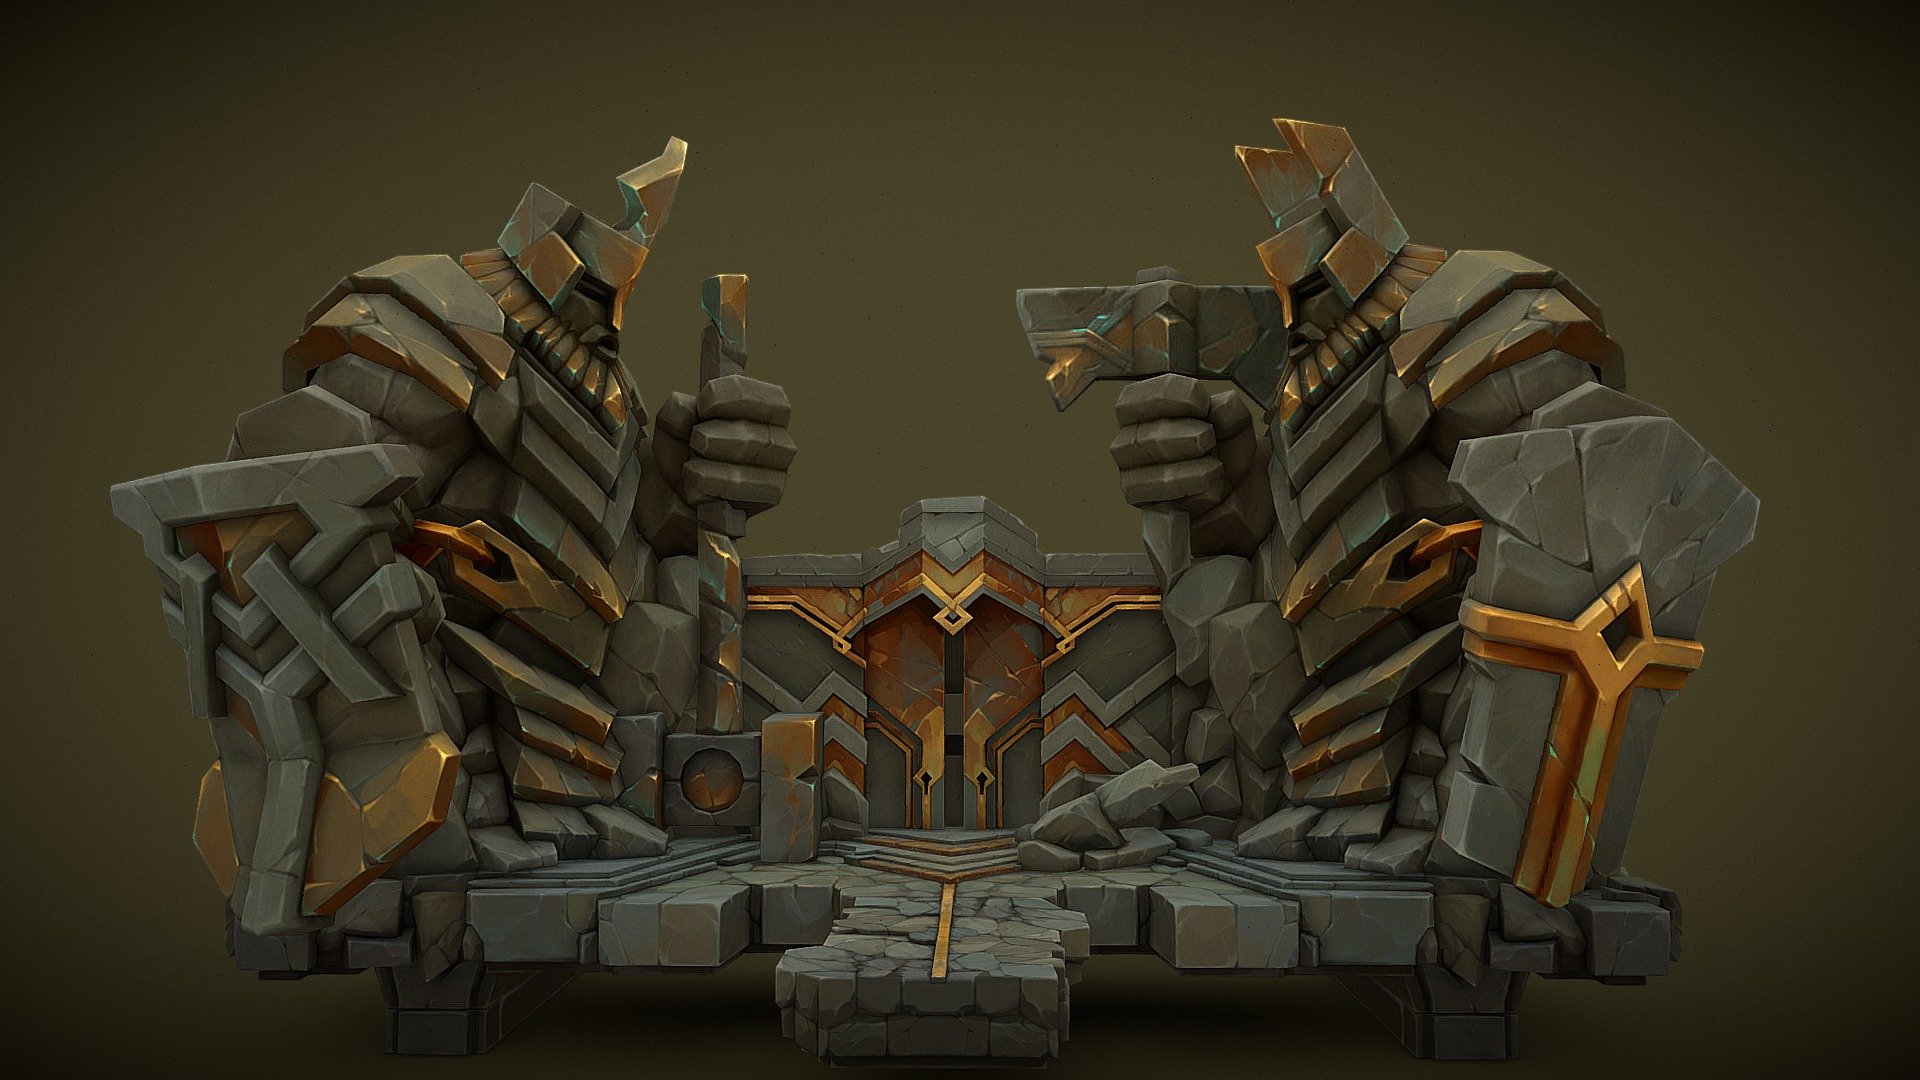 Dwarfs Mountain Gates

The Dwarves' Gate. The entrance to the land of the dwarves. The object cannot be walked around - the detail falls from behind and from above.

Mobile Game asset.
8k Tris
3 Textures - 2x 2048x2048 1x 1024x1024
Handpainted - Dwarfs Mountain Gates - 3D model by Andrey (@fruitmamba) 3d model